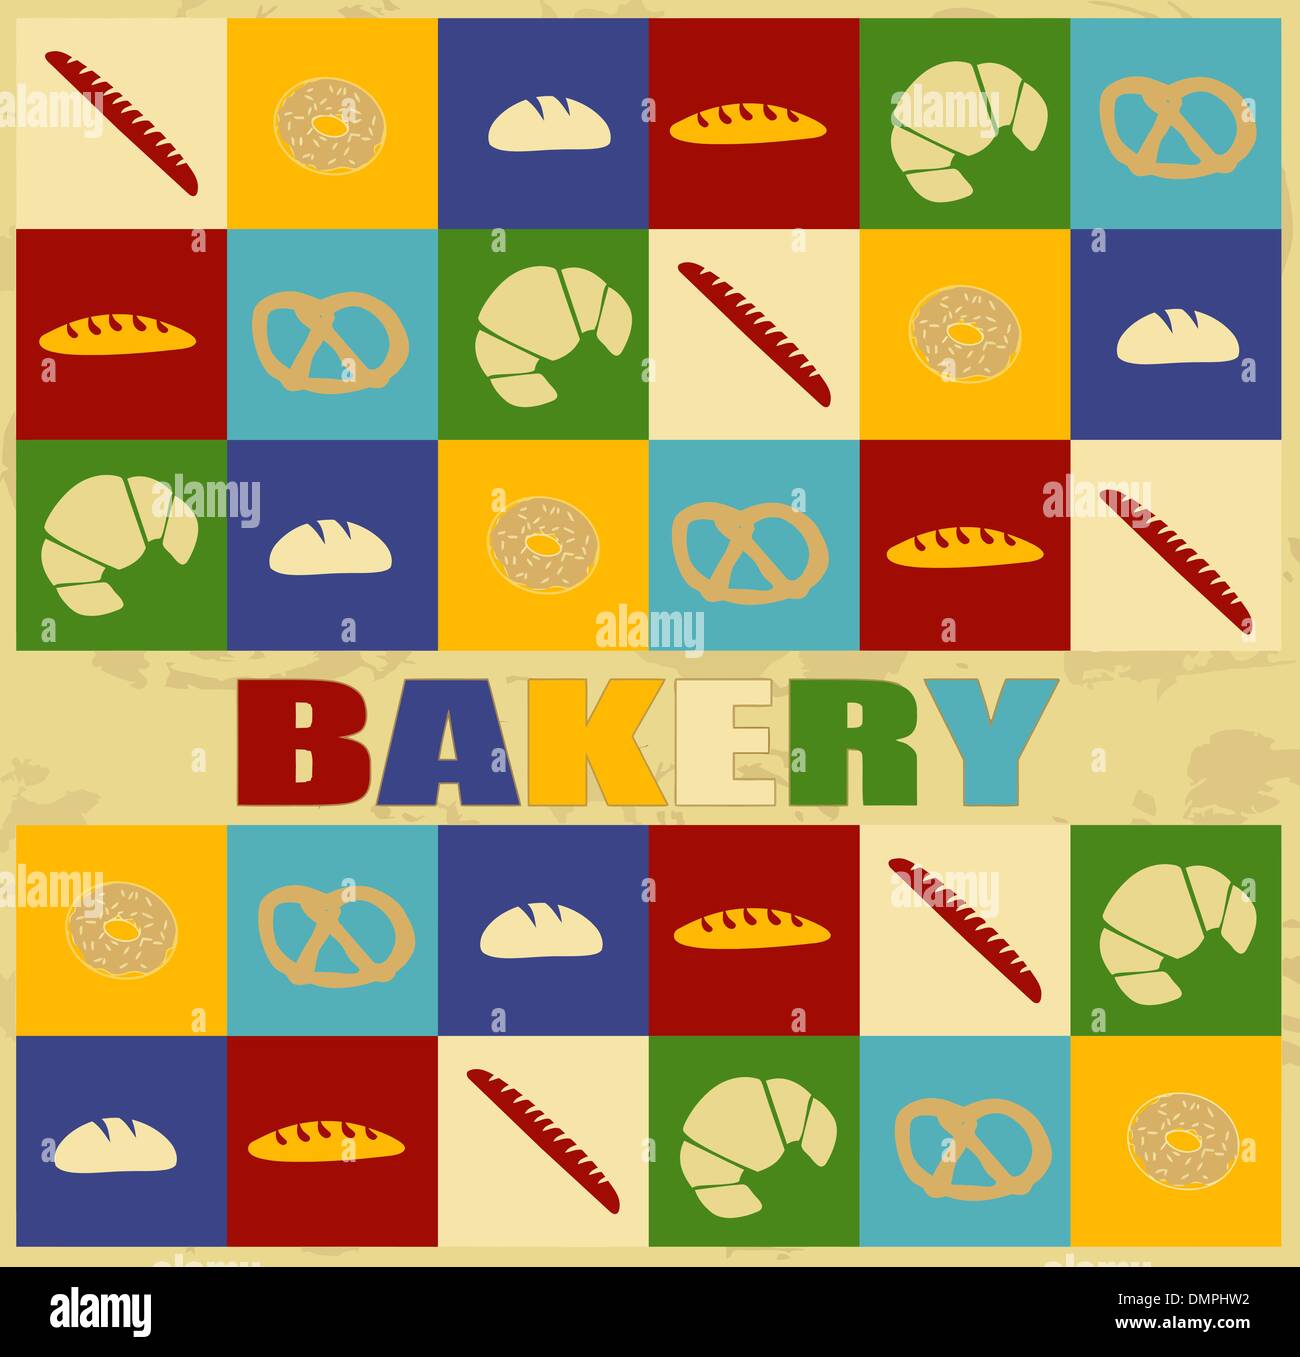 Bakery vintage poster Stock Vector